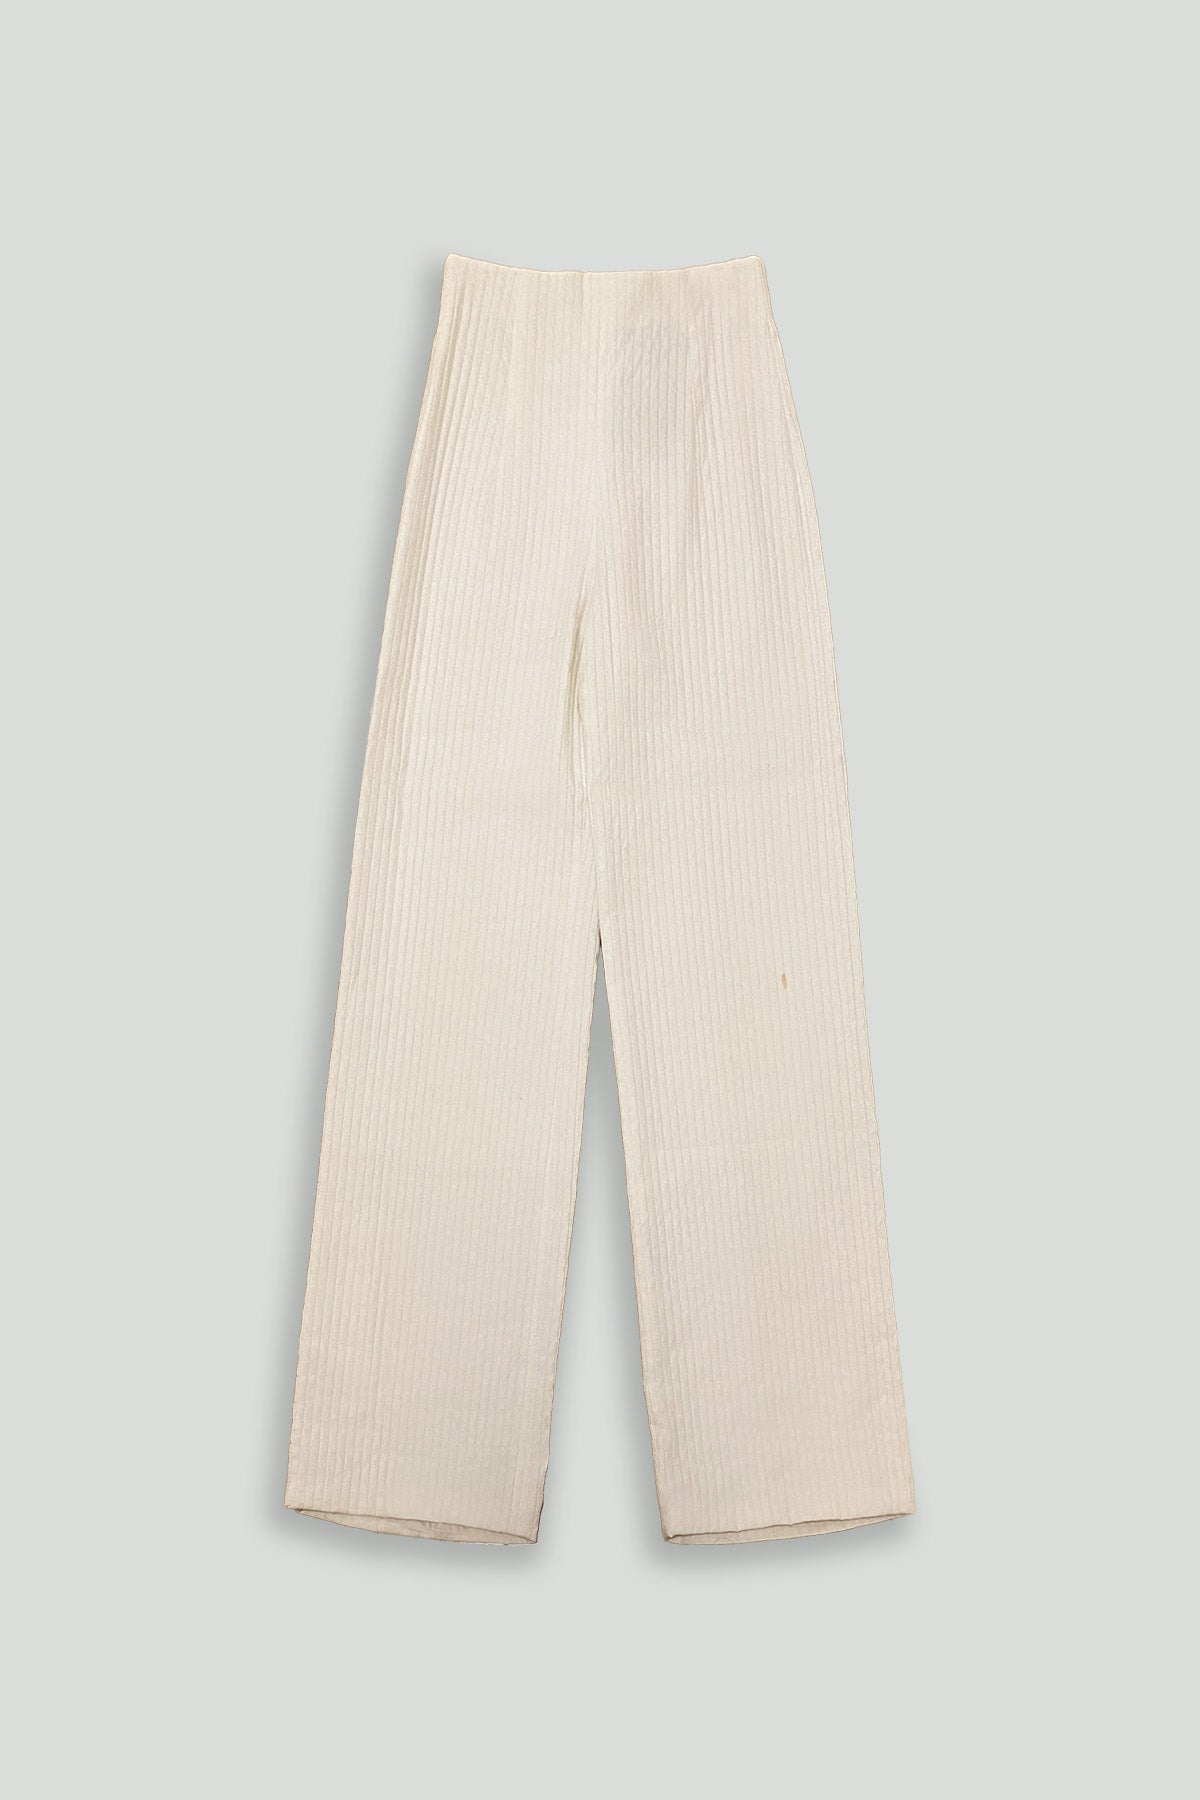 Cream Wide Wale Cotton High-Waisted Pant